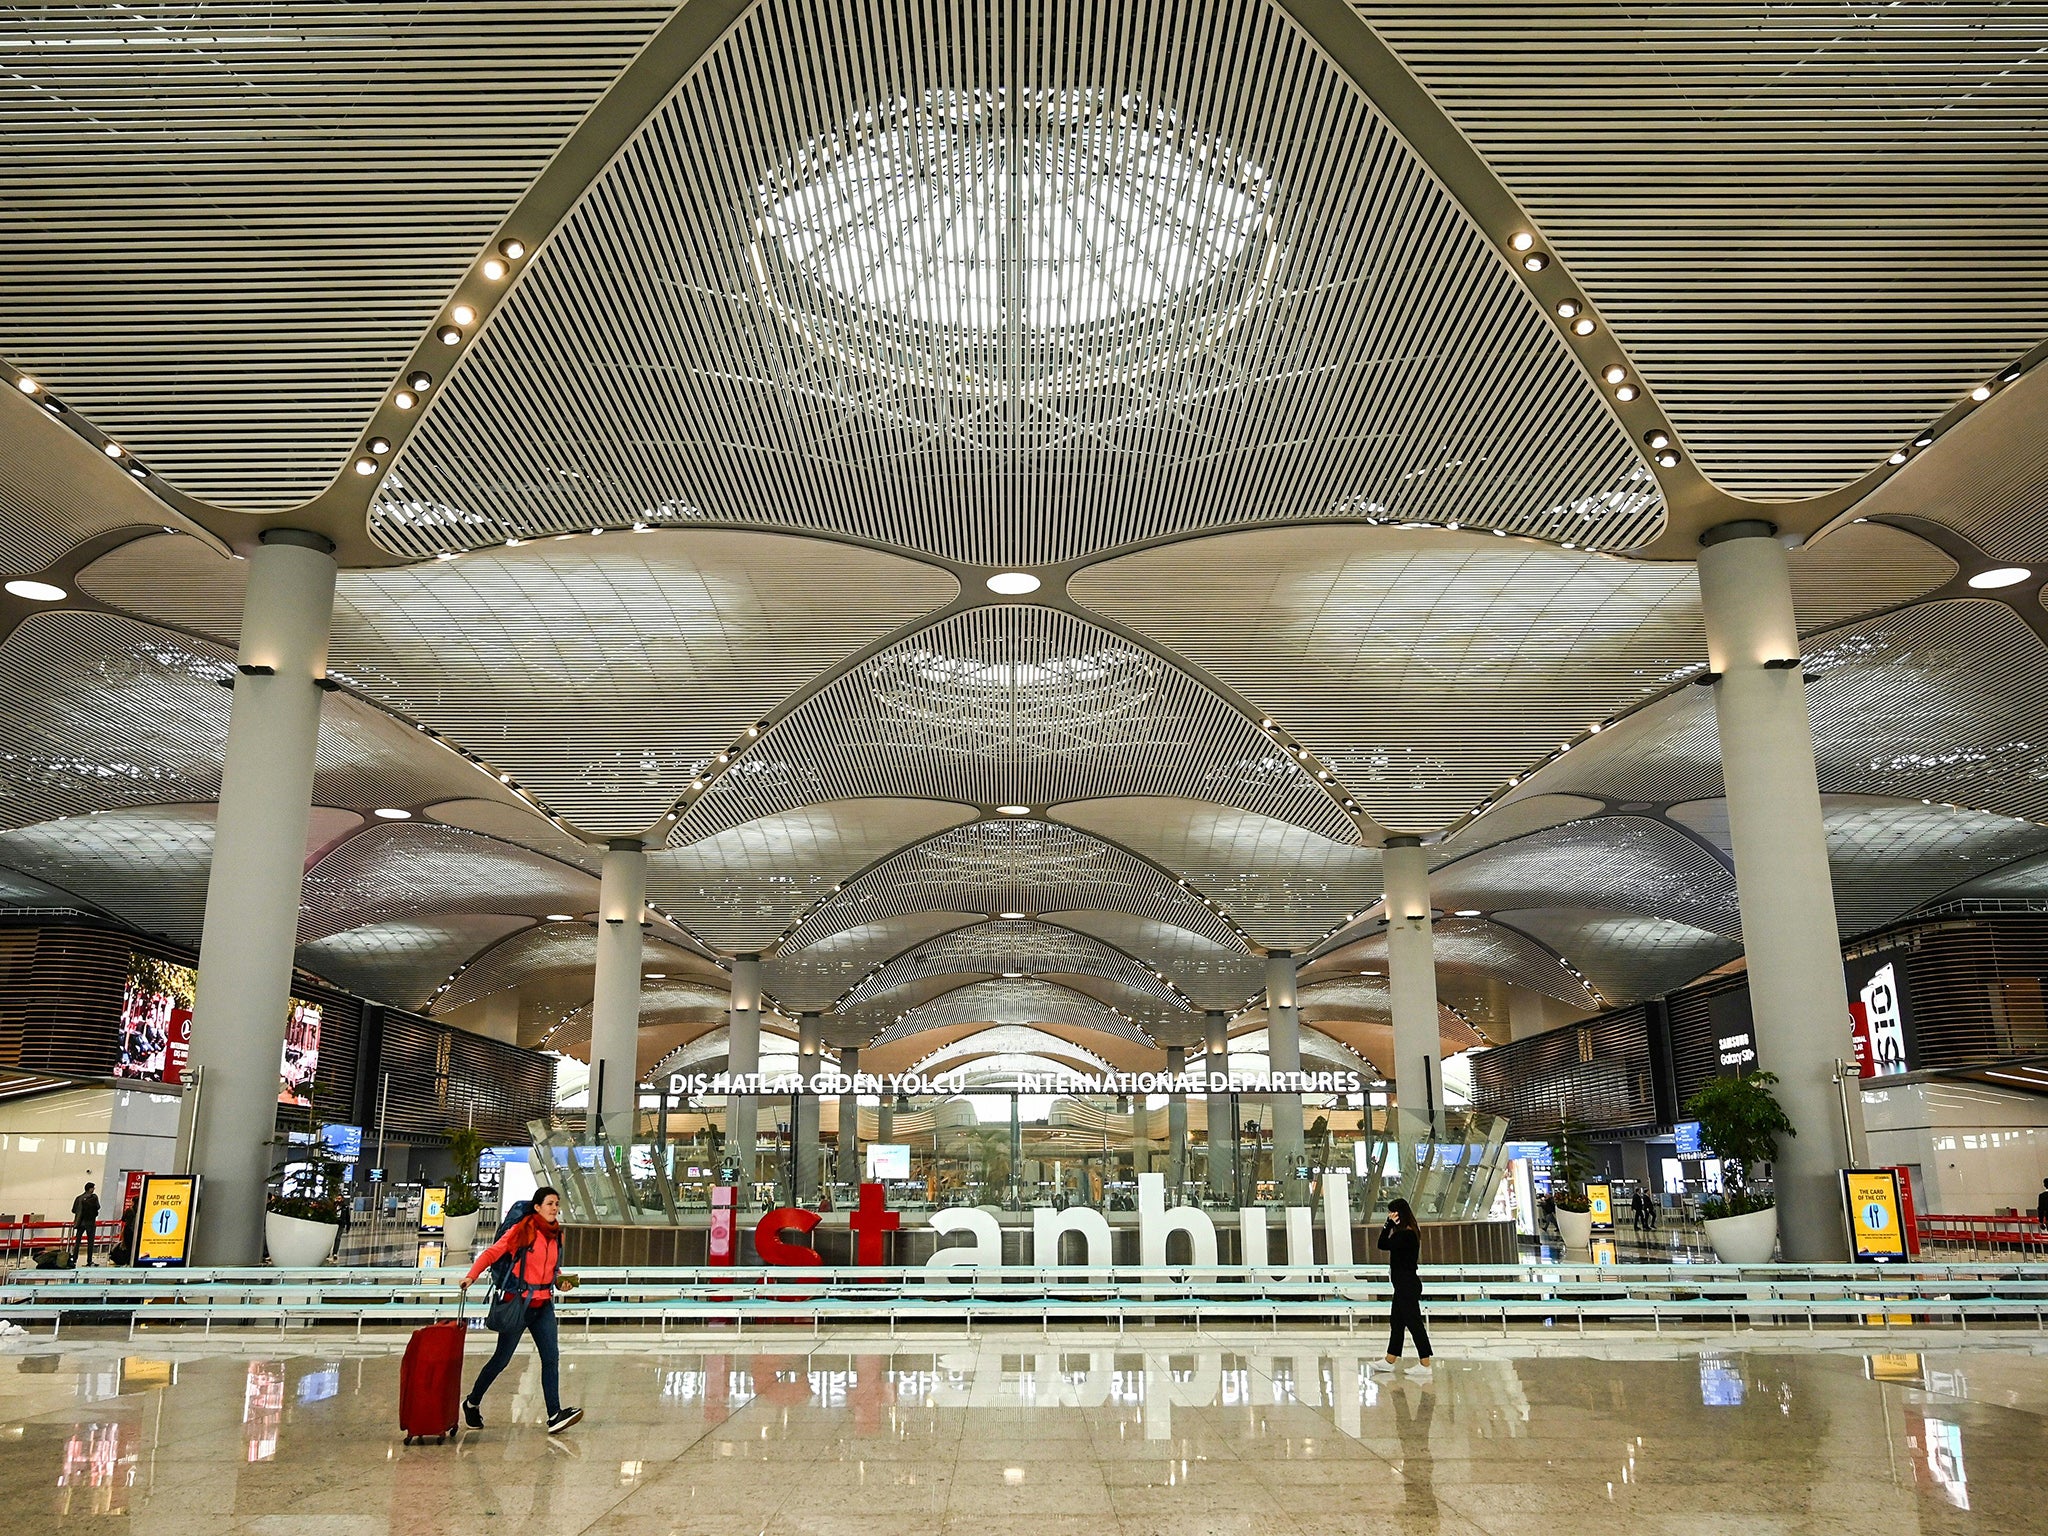 Istanbul airport has five terminals